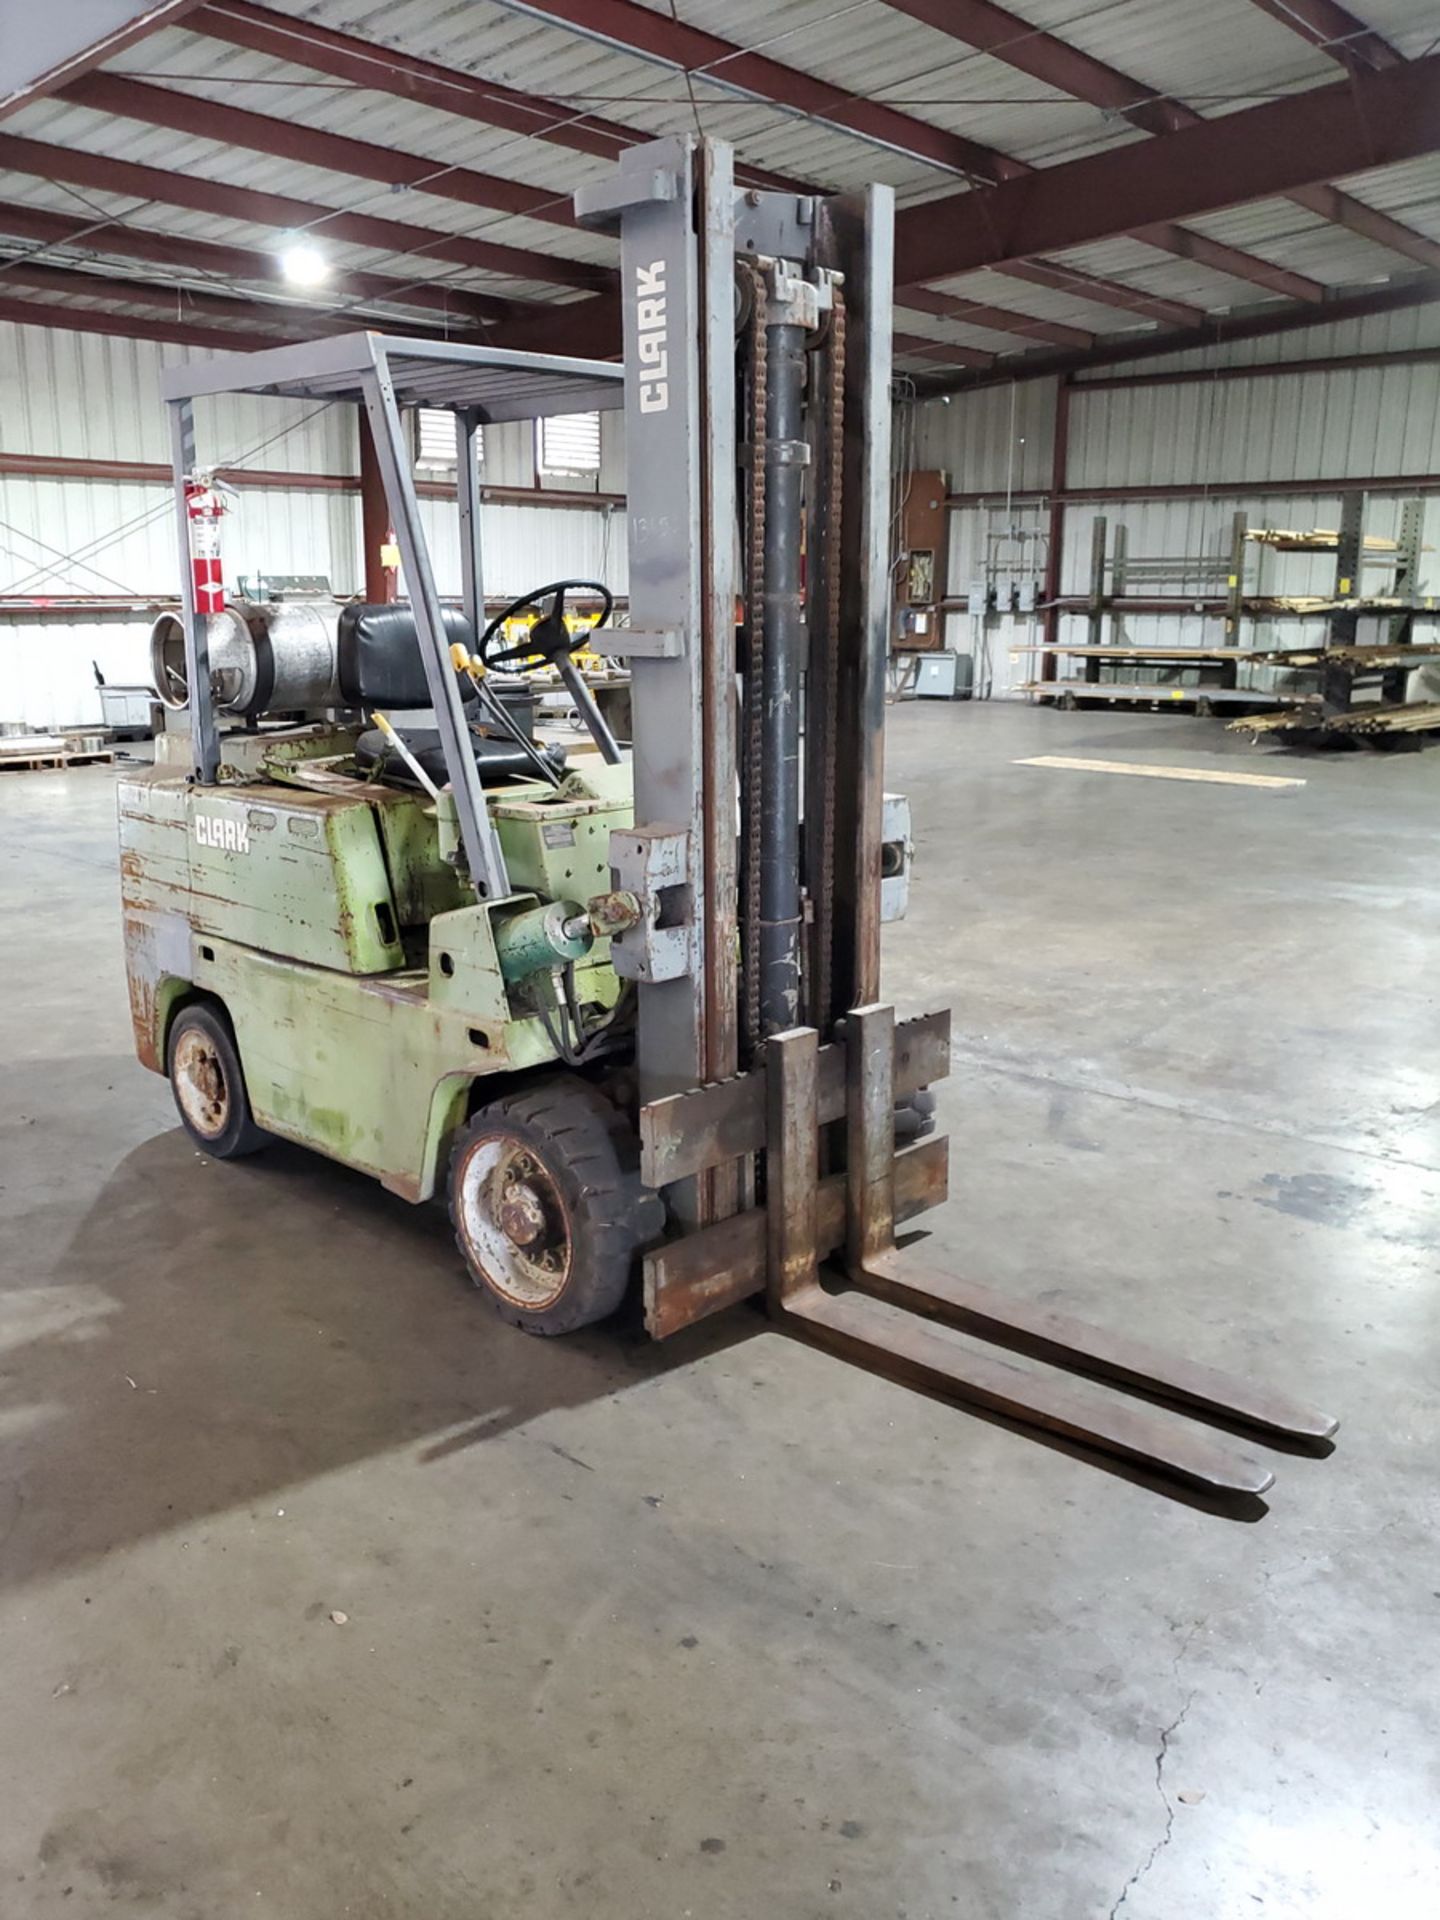 Clark C500-S80 LP Forklift 5,800Cap., 1,410hrs, 42" Forks, Single-Stage Mast, 147" Lift Height - Image 2 of 11